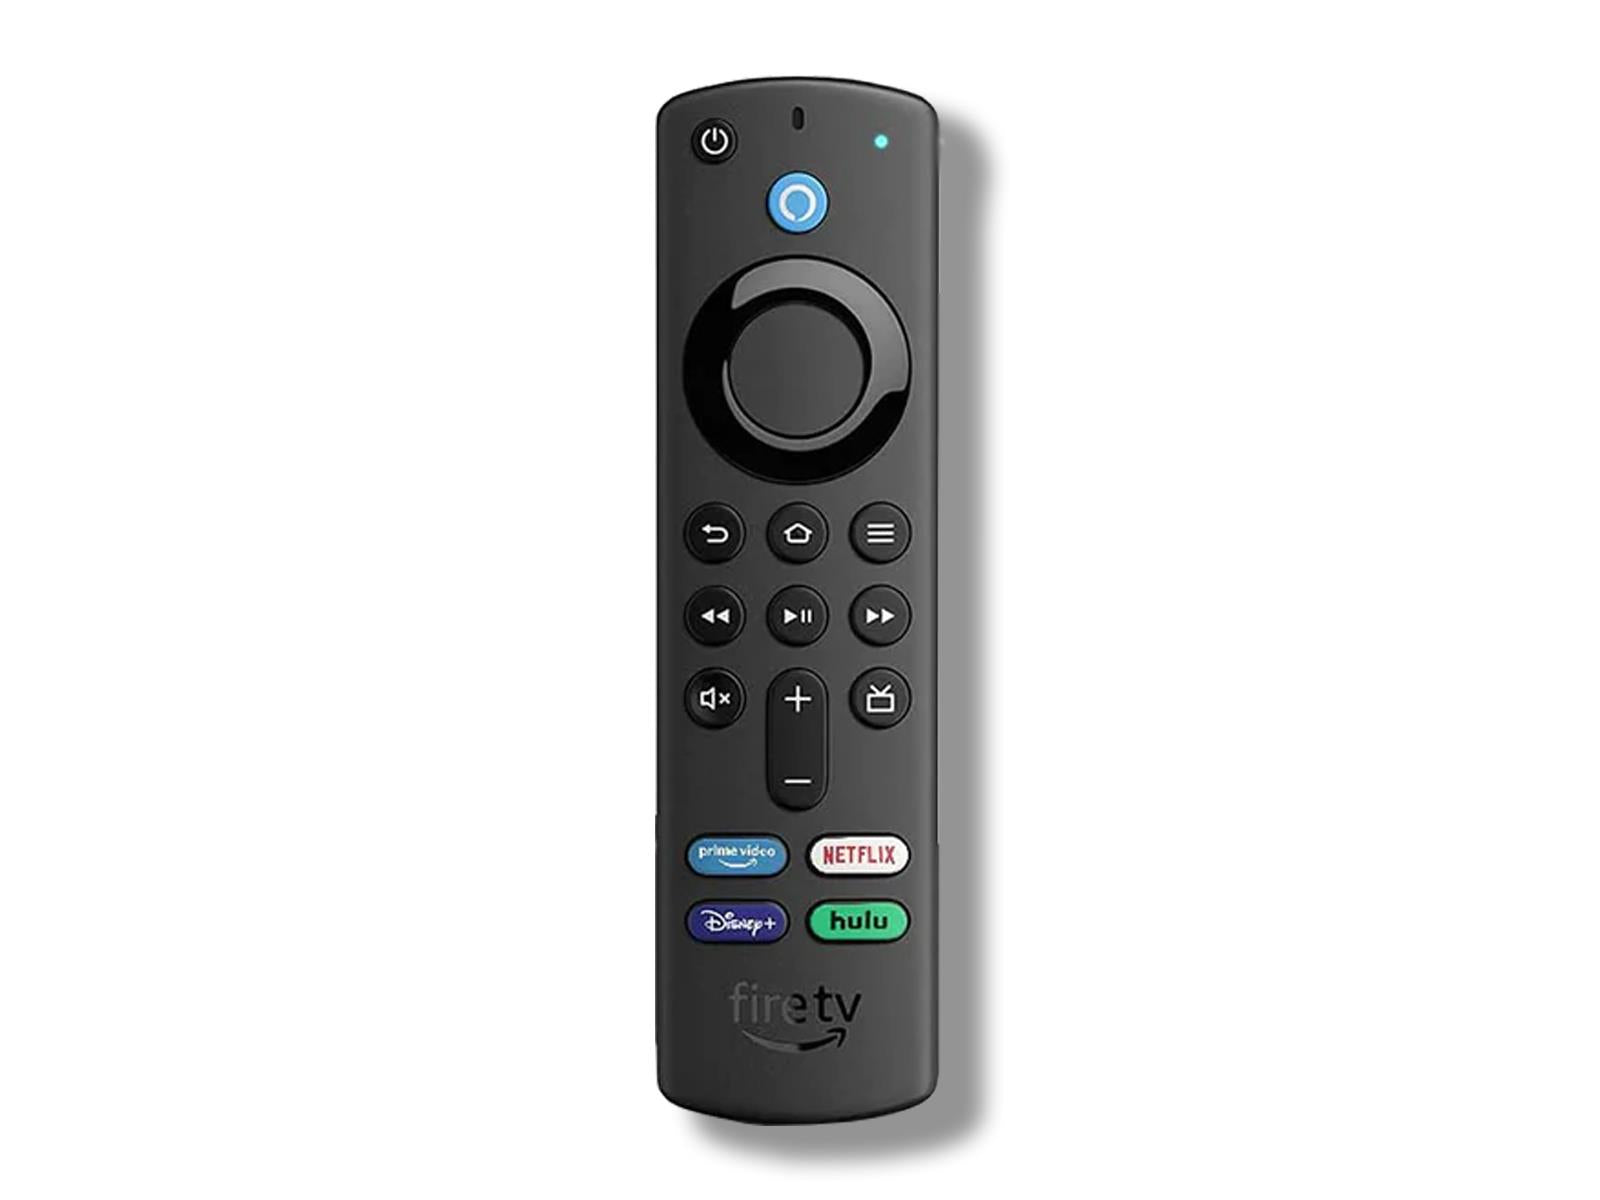 Image shows an overhead view of the Fire TV Stick Replacement Remote Control with Alexa Voice Control